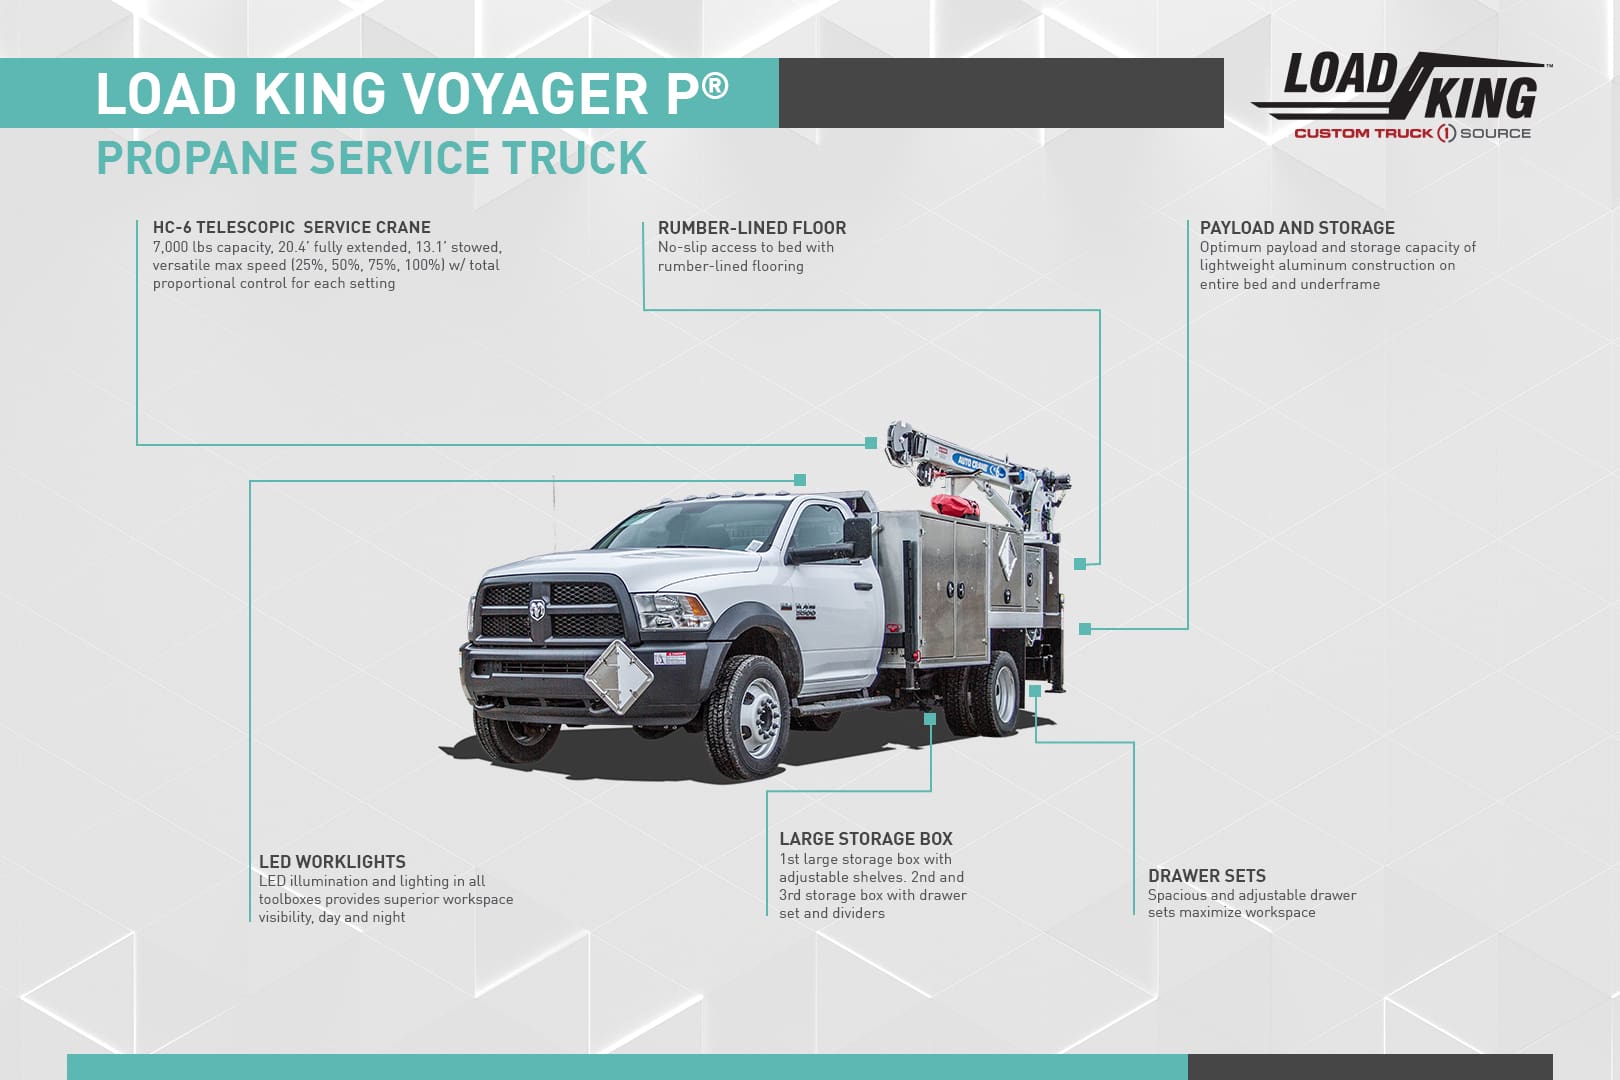 Voyager P Propane Service Truck Infographic